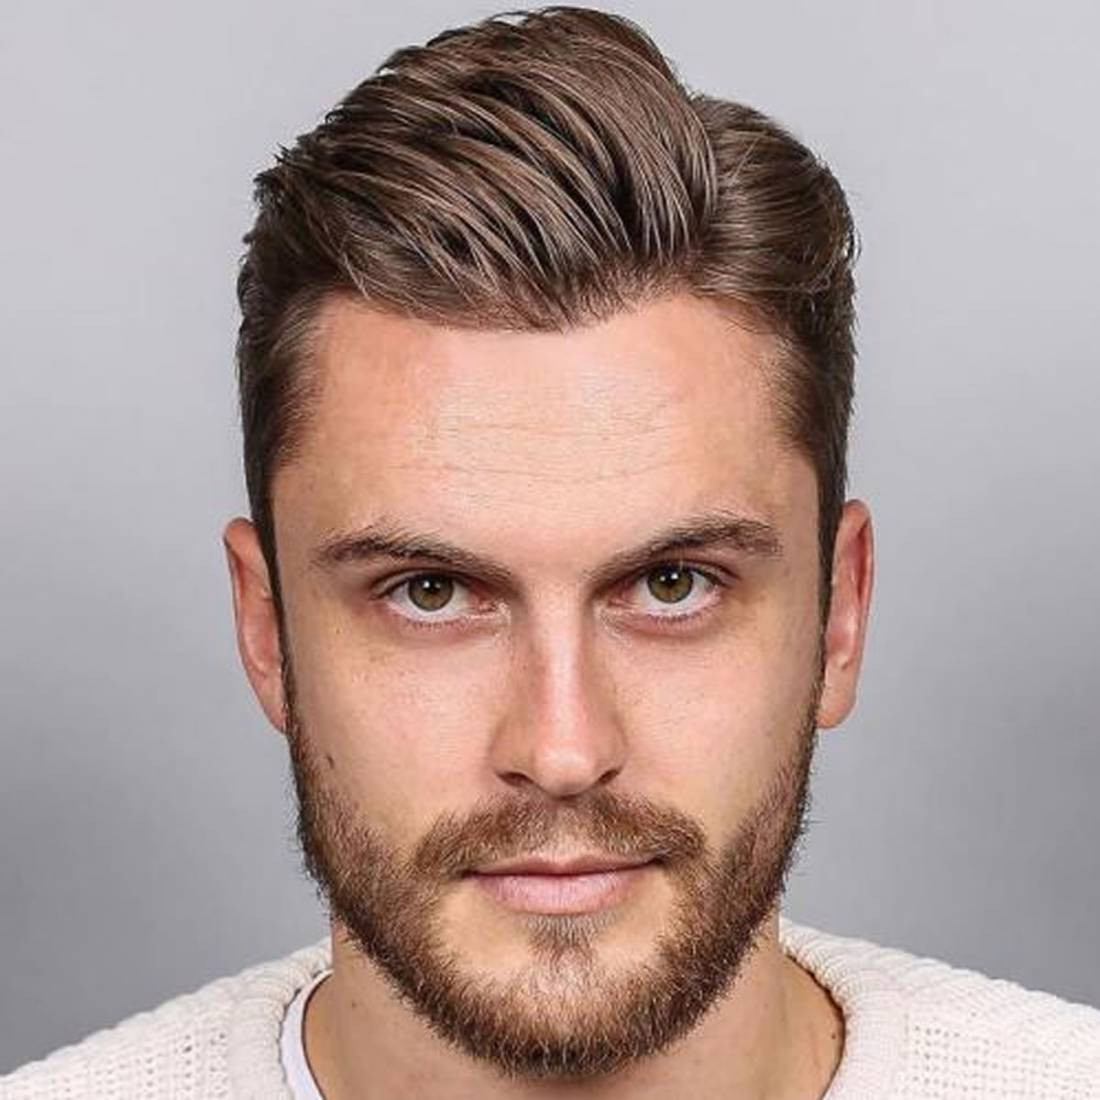 Best Short Mens Haircuts
 The 60 Best Short Hairstyles for Men